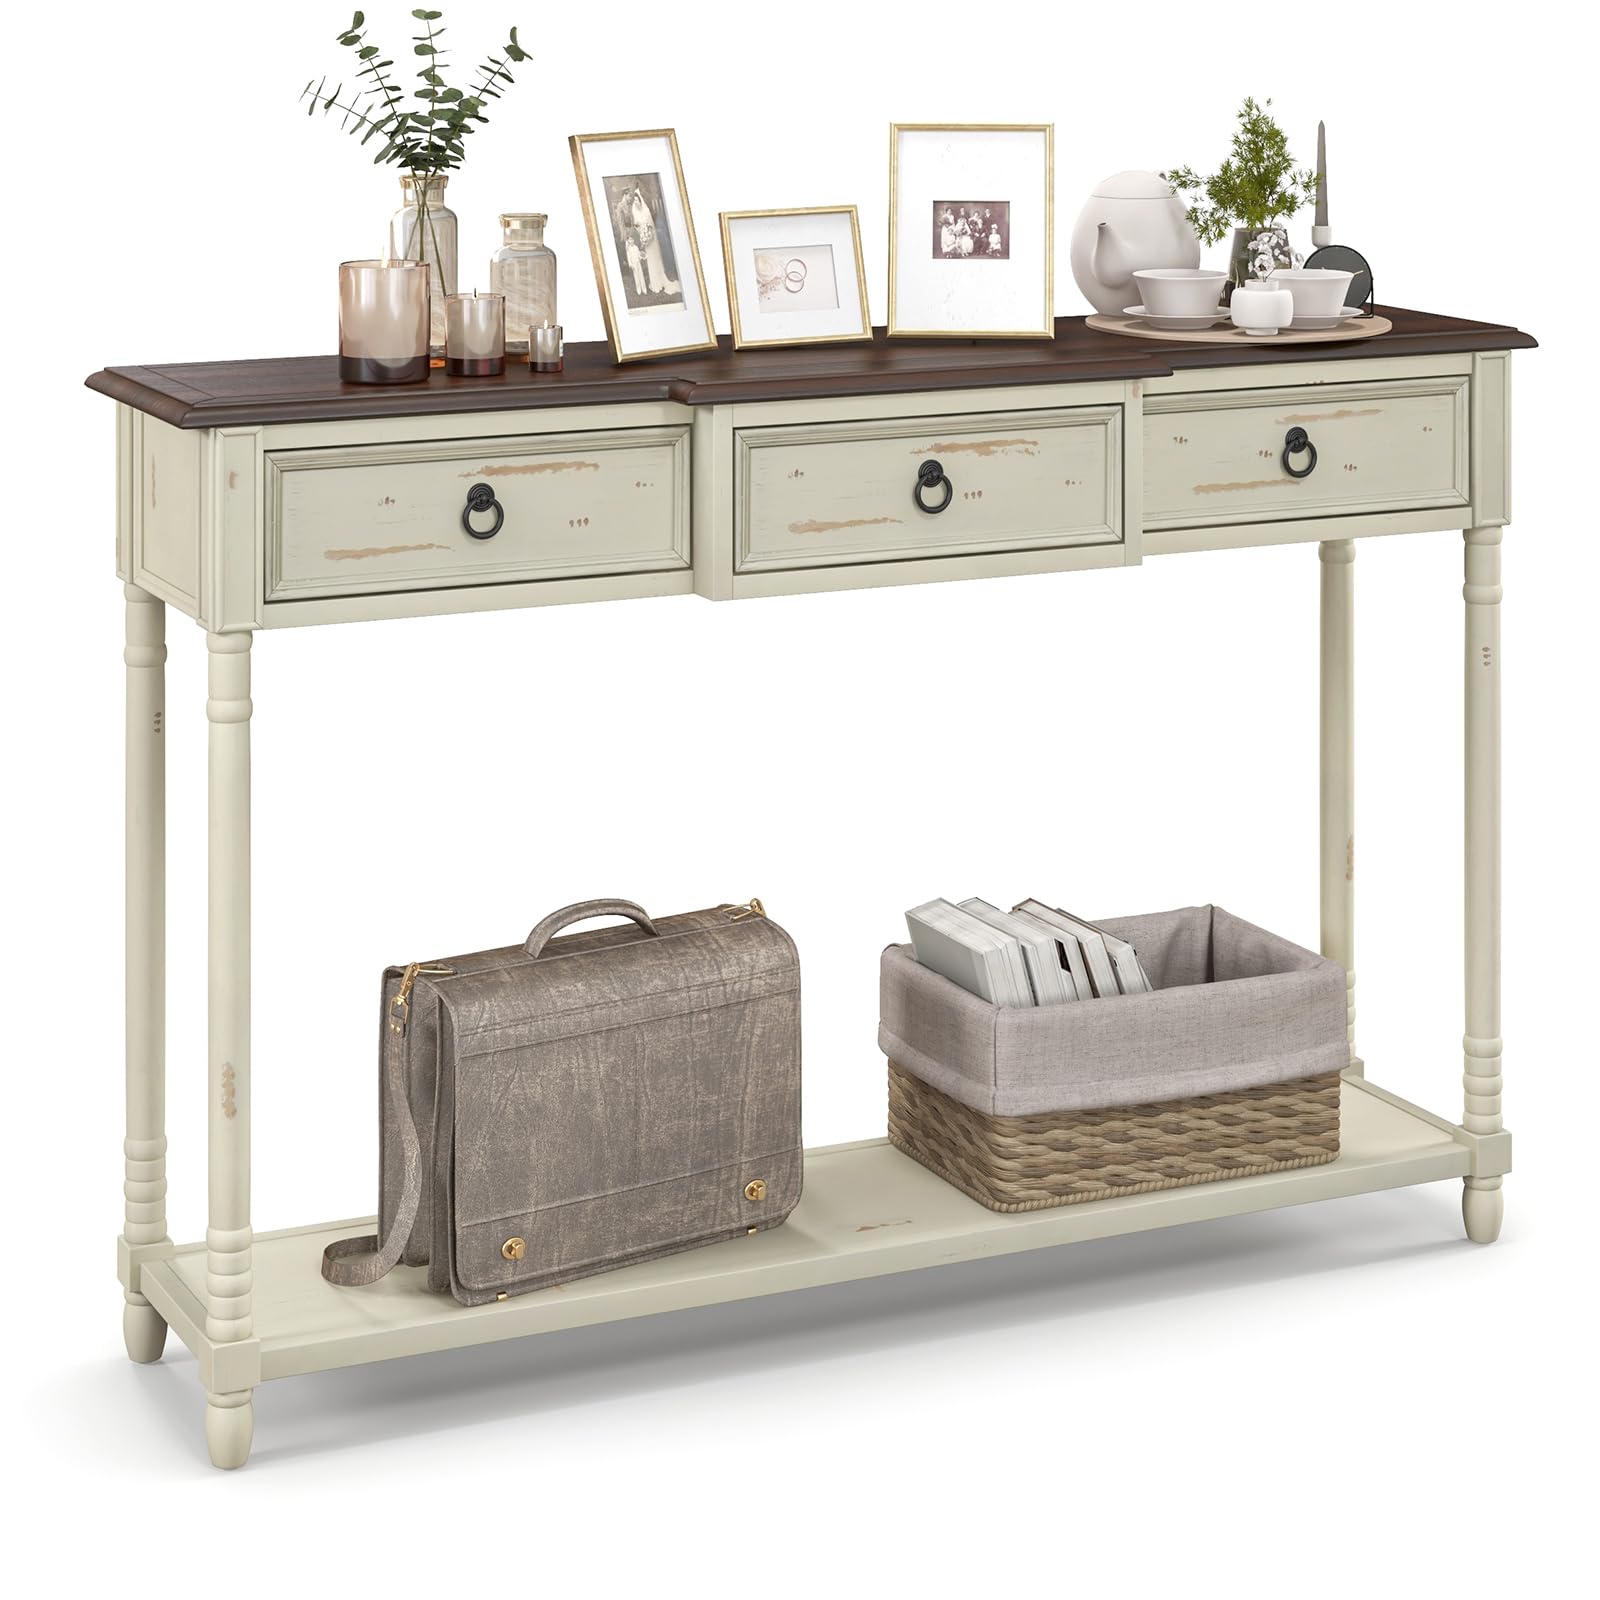 Giantex Console Table with 3 Storage Drawers - Entry Table, Rustic Farmhouse Entryway Table with Open Storage Shelf